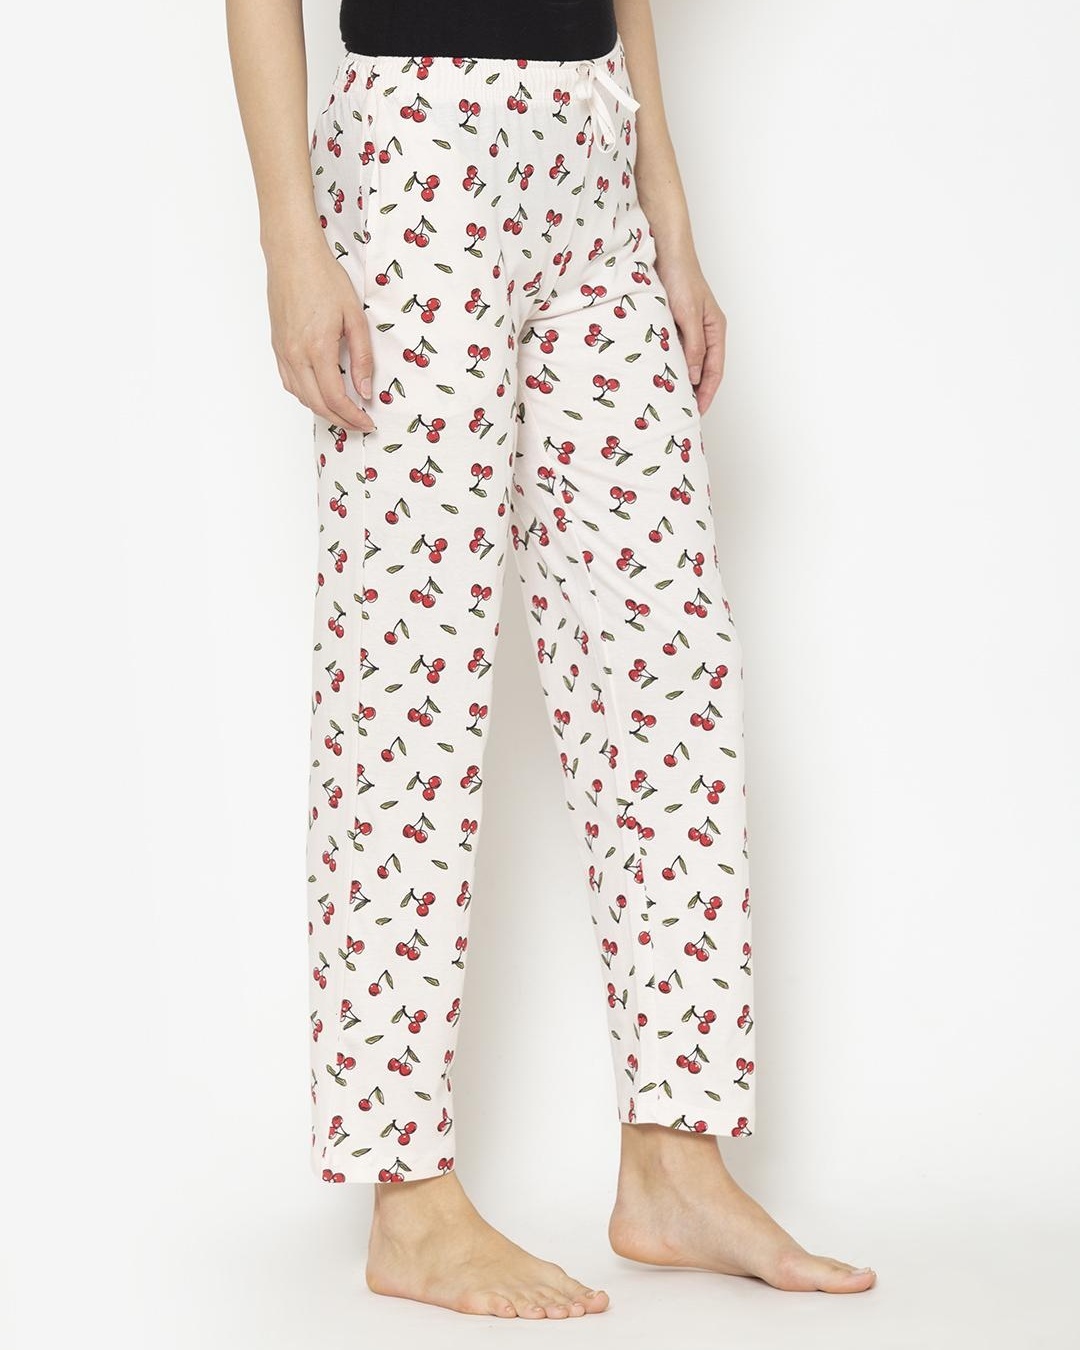 Shop Pack of 2 Women's White & Red All Over Printed Pyjamas-Back